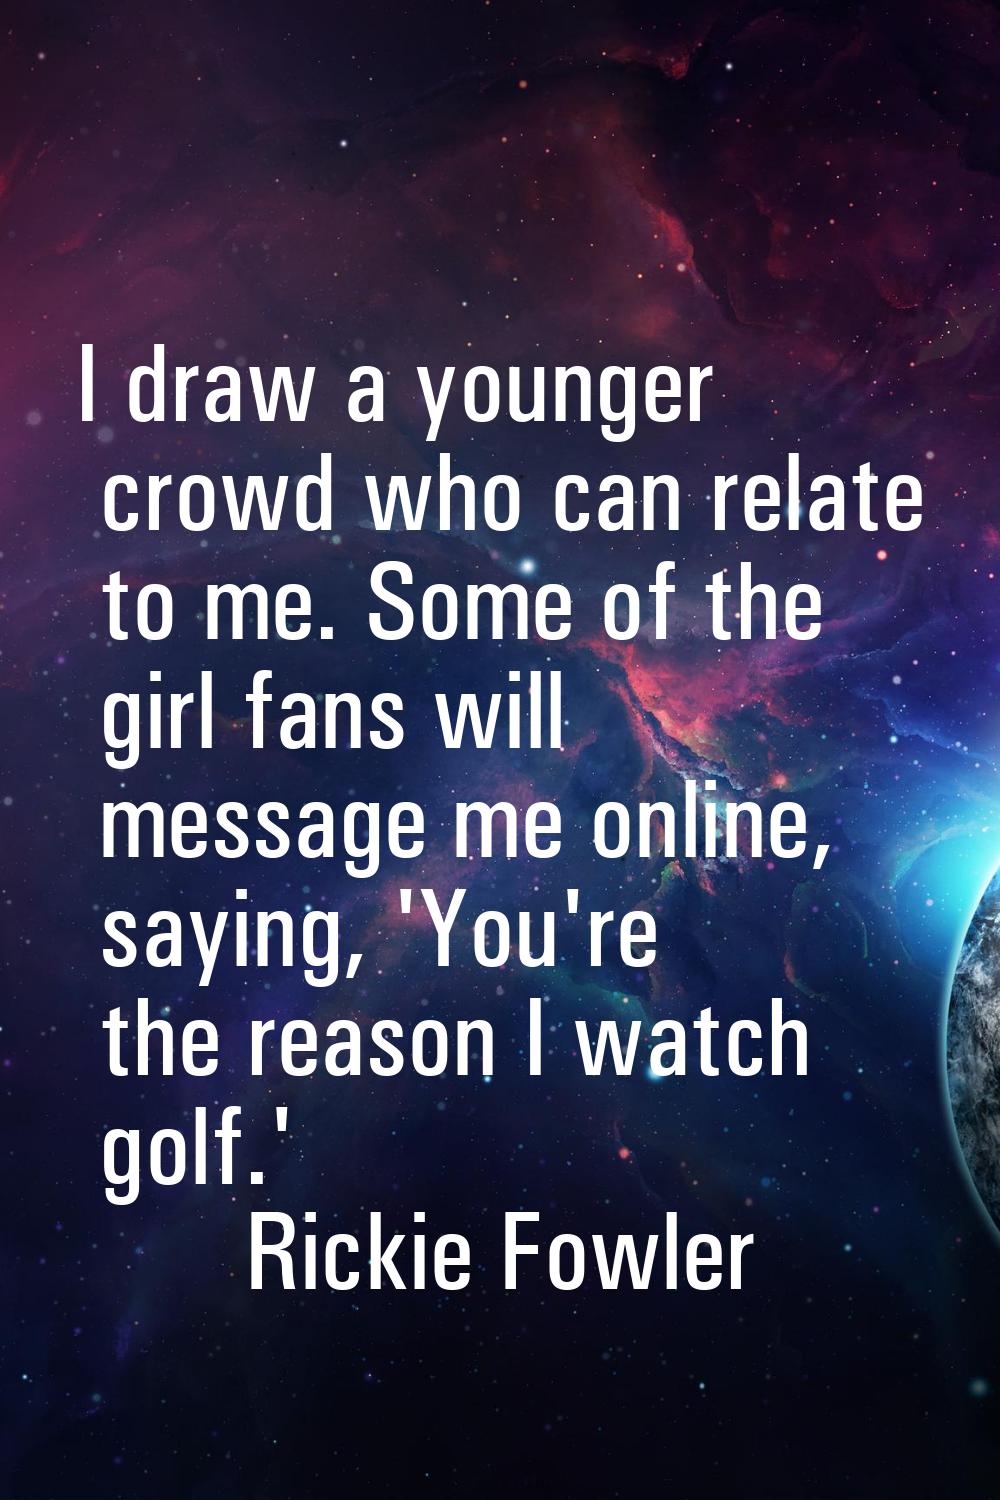 I draw a younger crowd who can relate to me. Some of the girl fans will message me online, saying, 